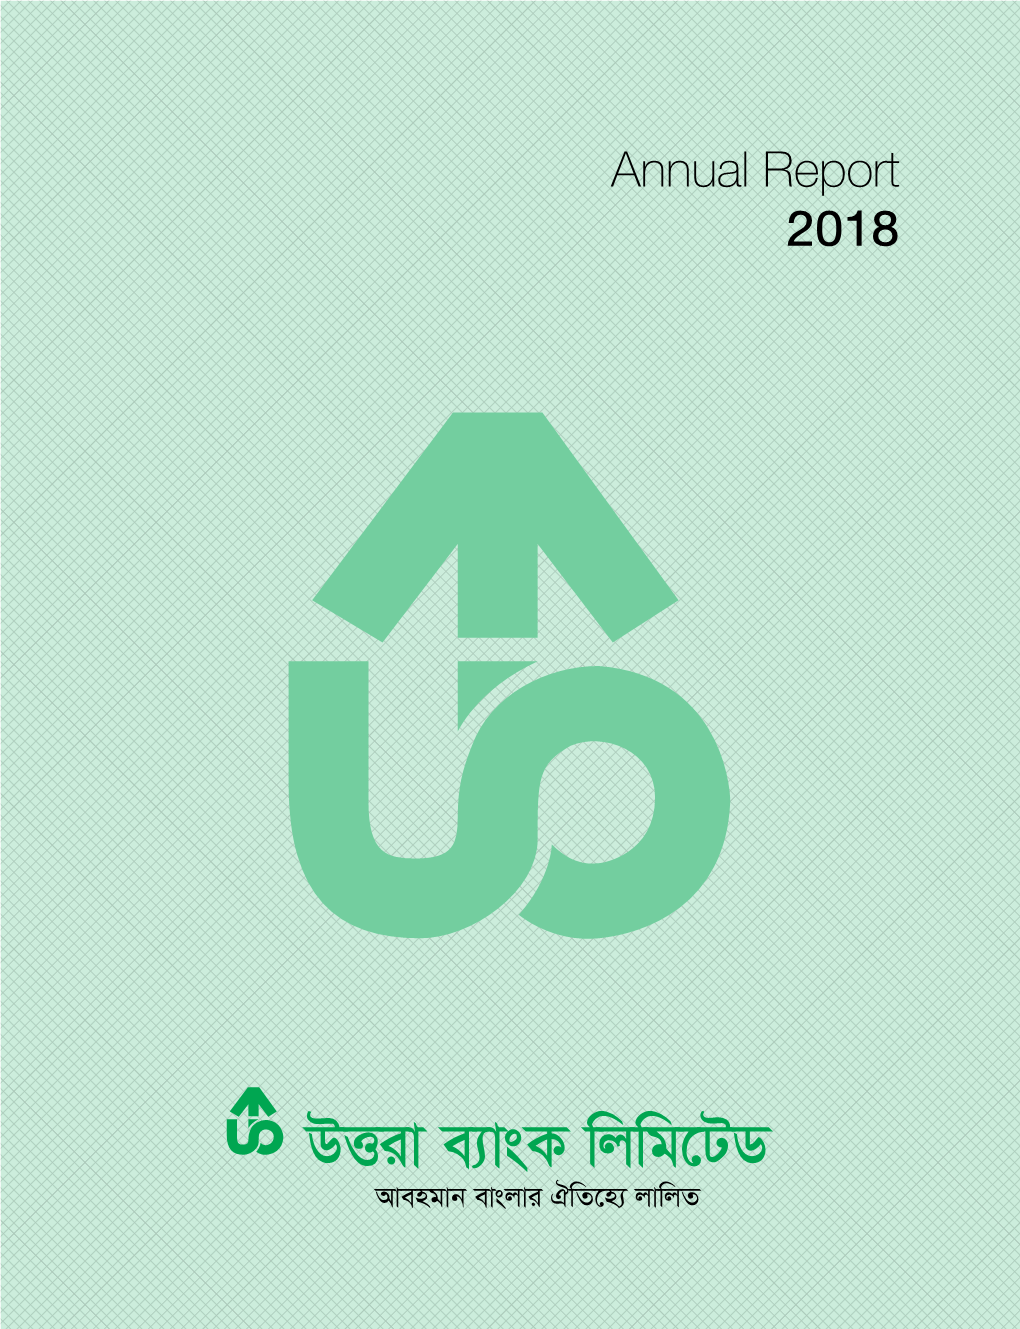 Annual Report-2018 CORPORATE INFORMATION